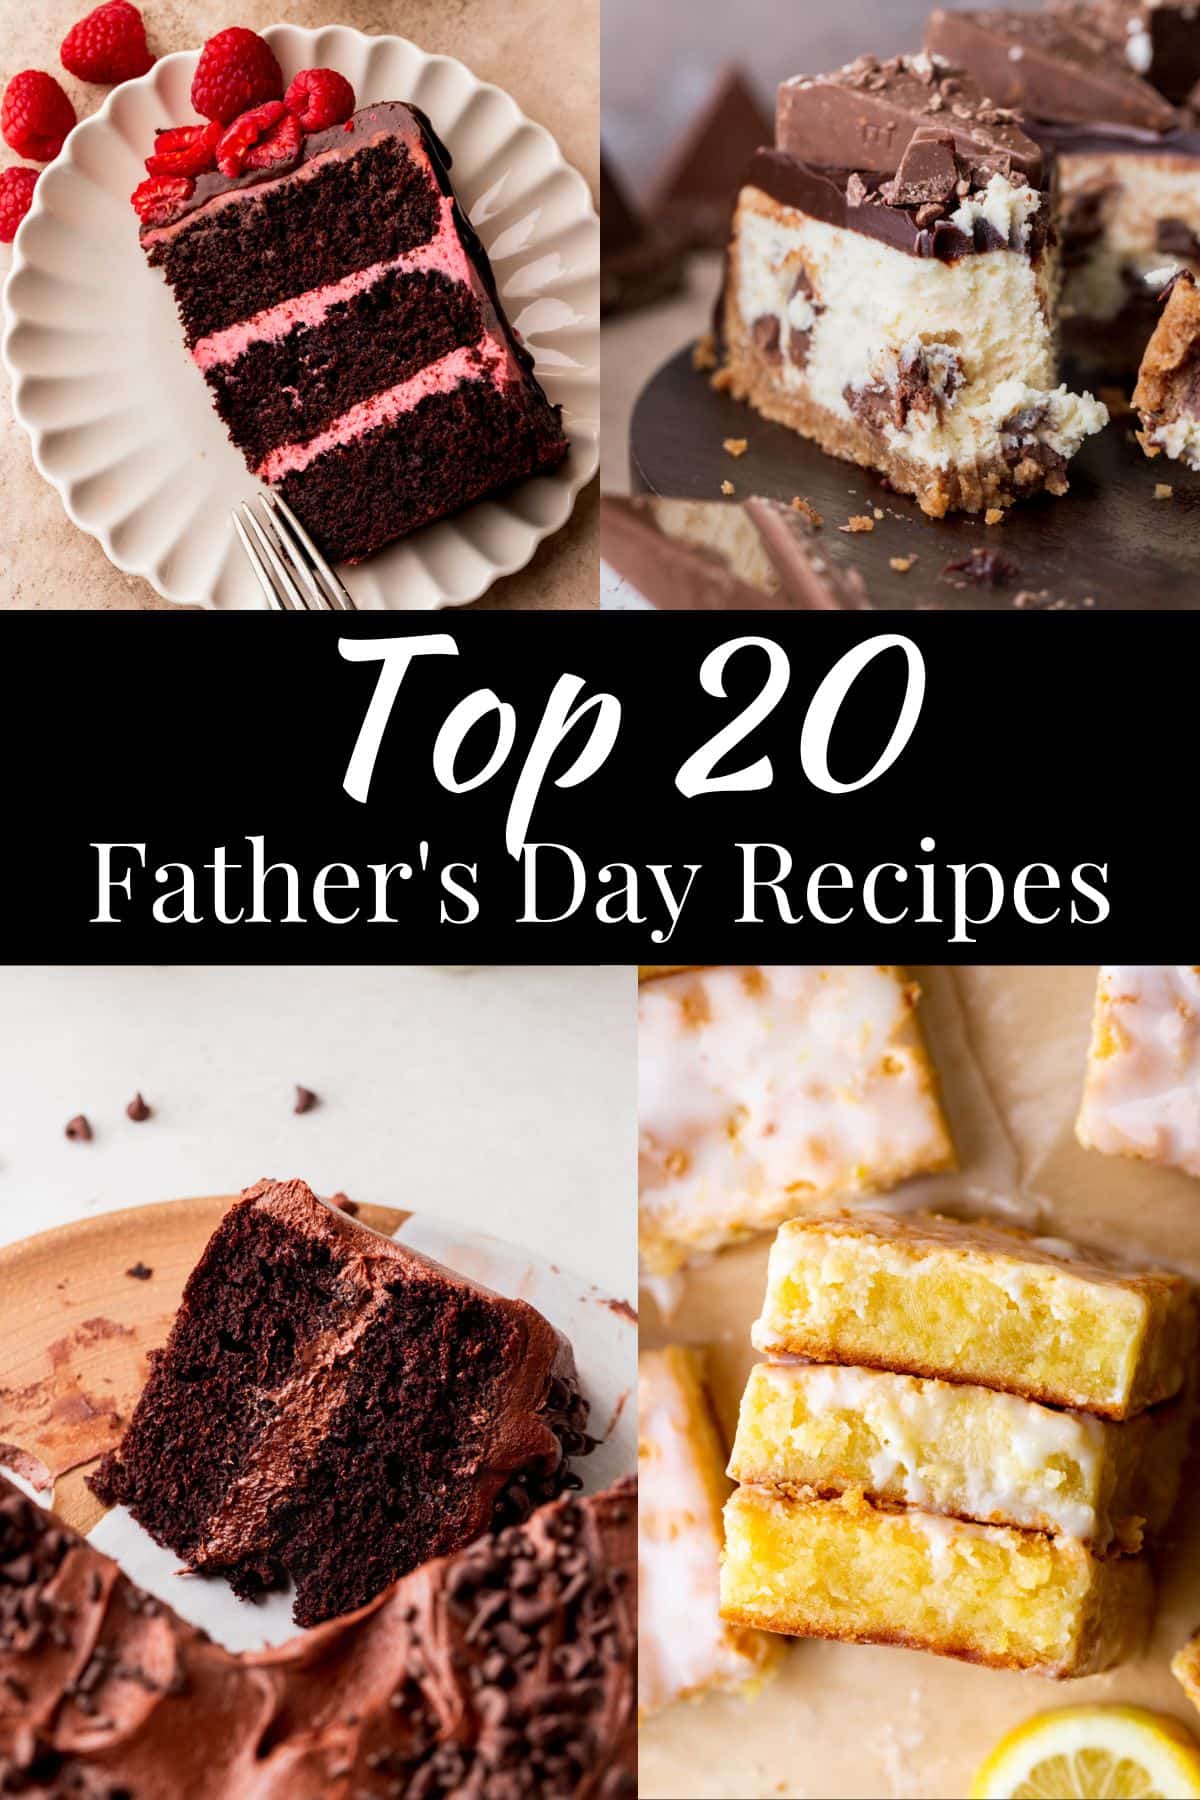 Top 20 Father's Day Recipes